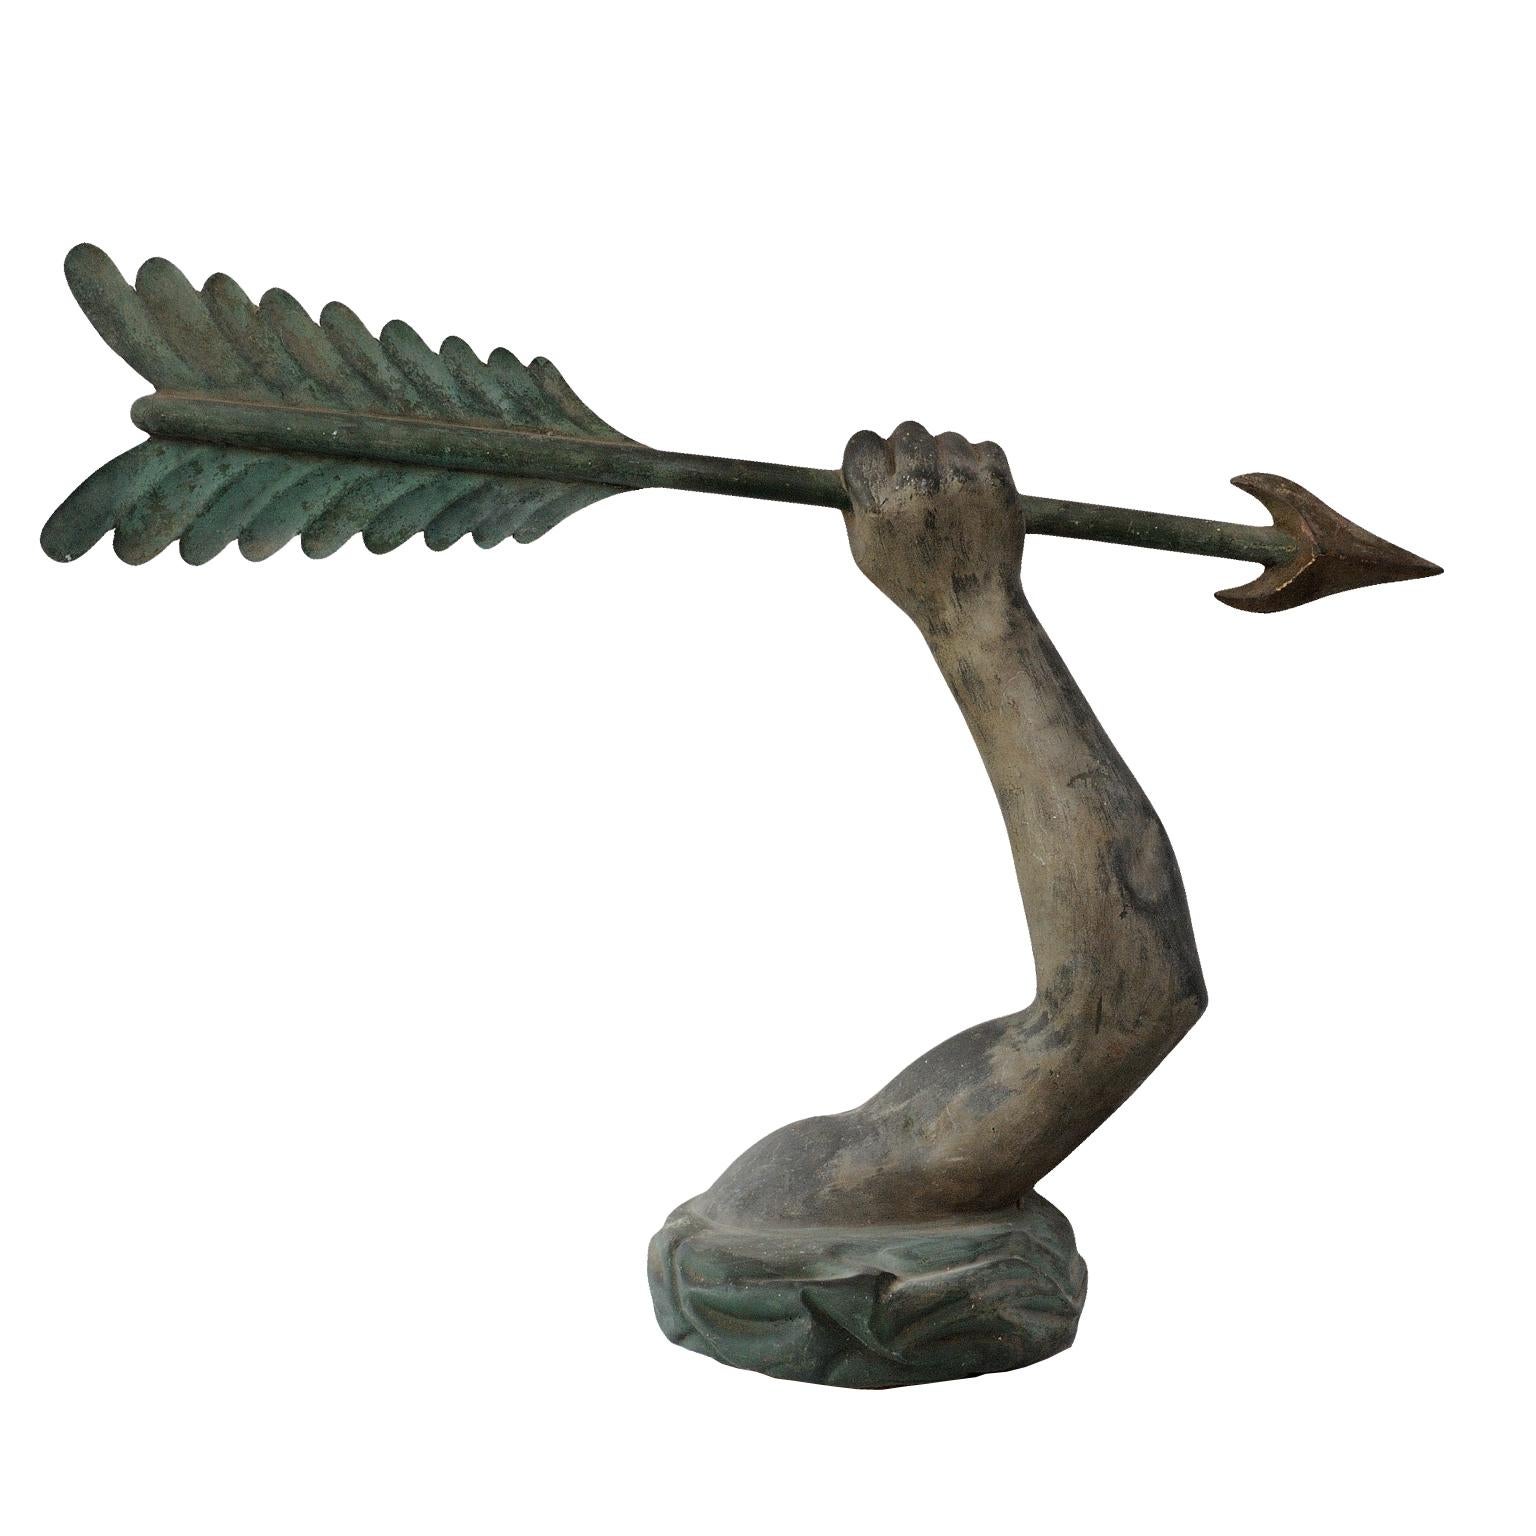 This is a wonderful early 19th century English verdigris copper Armorial finial removed from the top of a massive baronial weather vane. A compressed Turkish turban surrounded by an erect arm holding an arrow, suggesting the family had been on